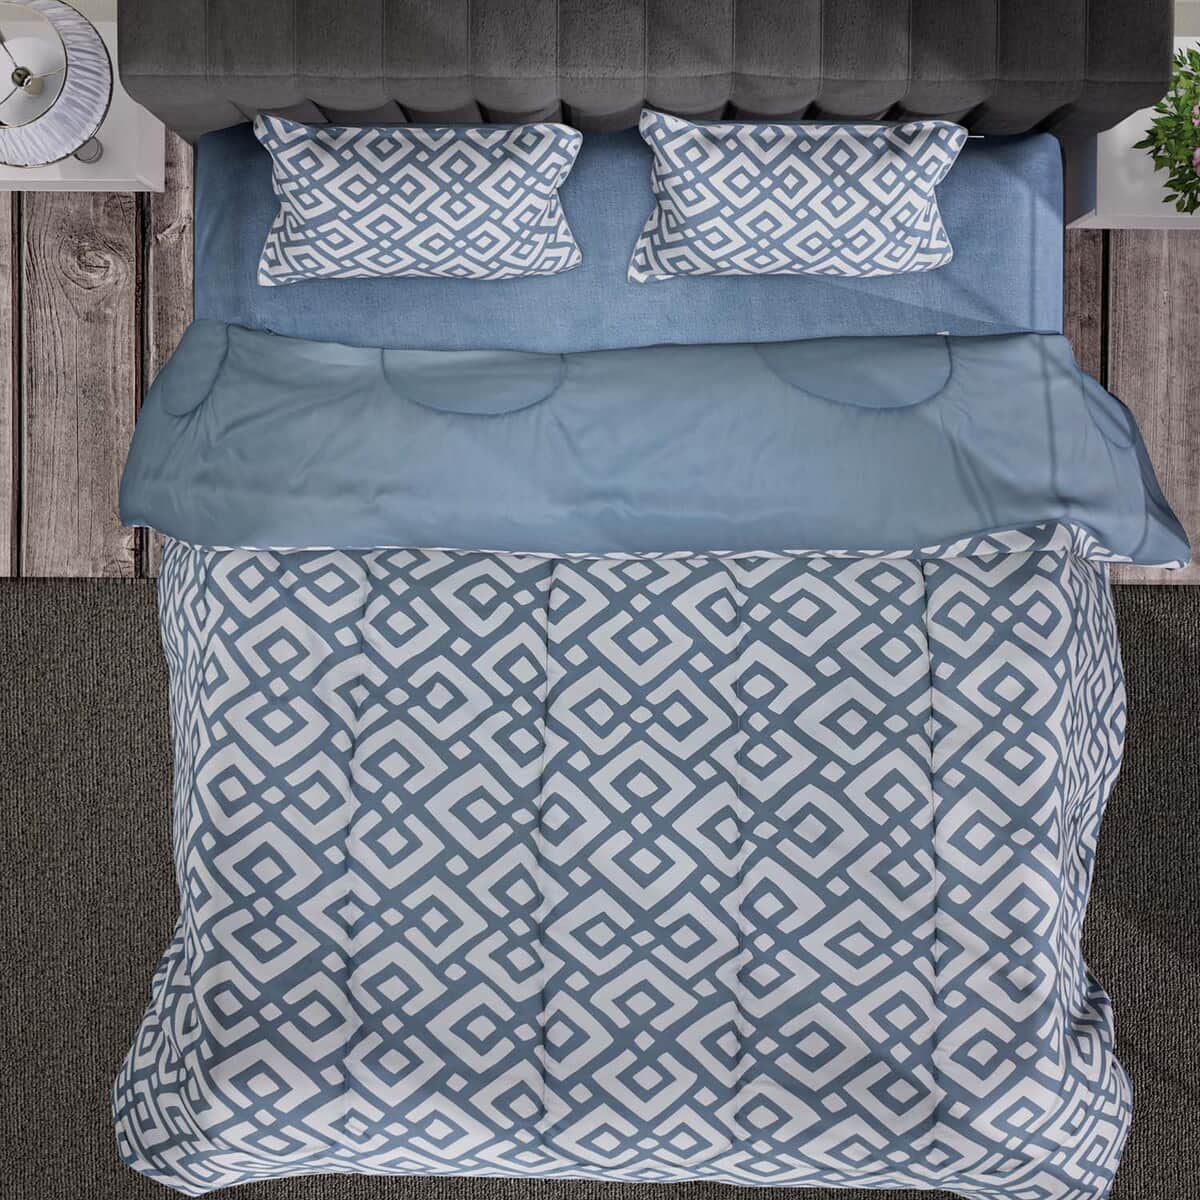 Blue Solid and Geometrical Print Microfiber 3pcs Comforter Set  - Queen image number 5